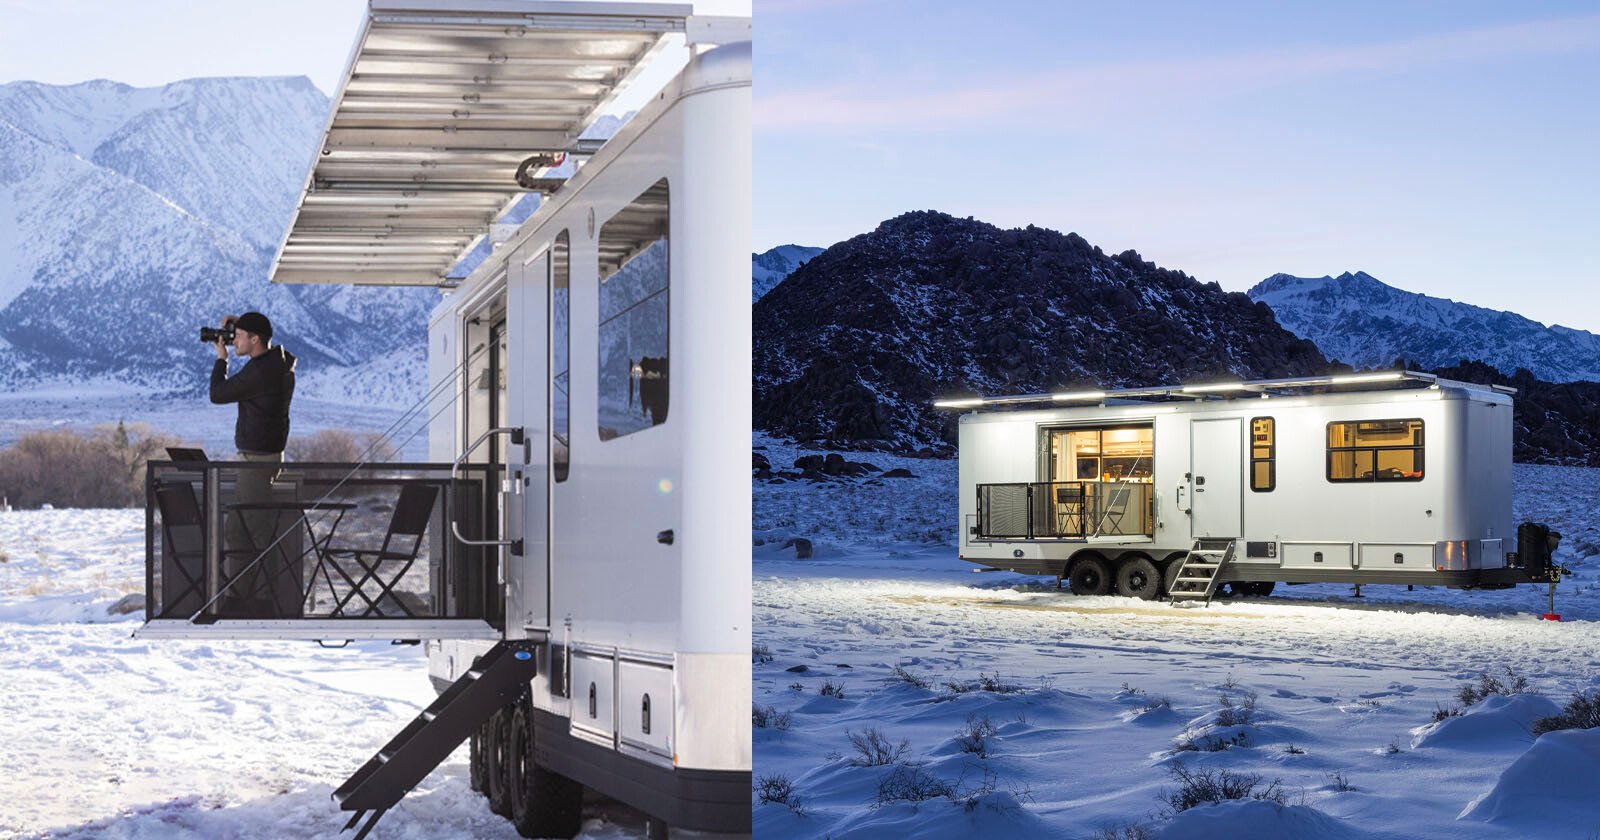 The Solar-Powered Living Vehicle Can Get You Off the Grid Indefinitely